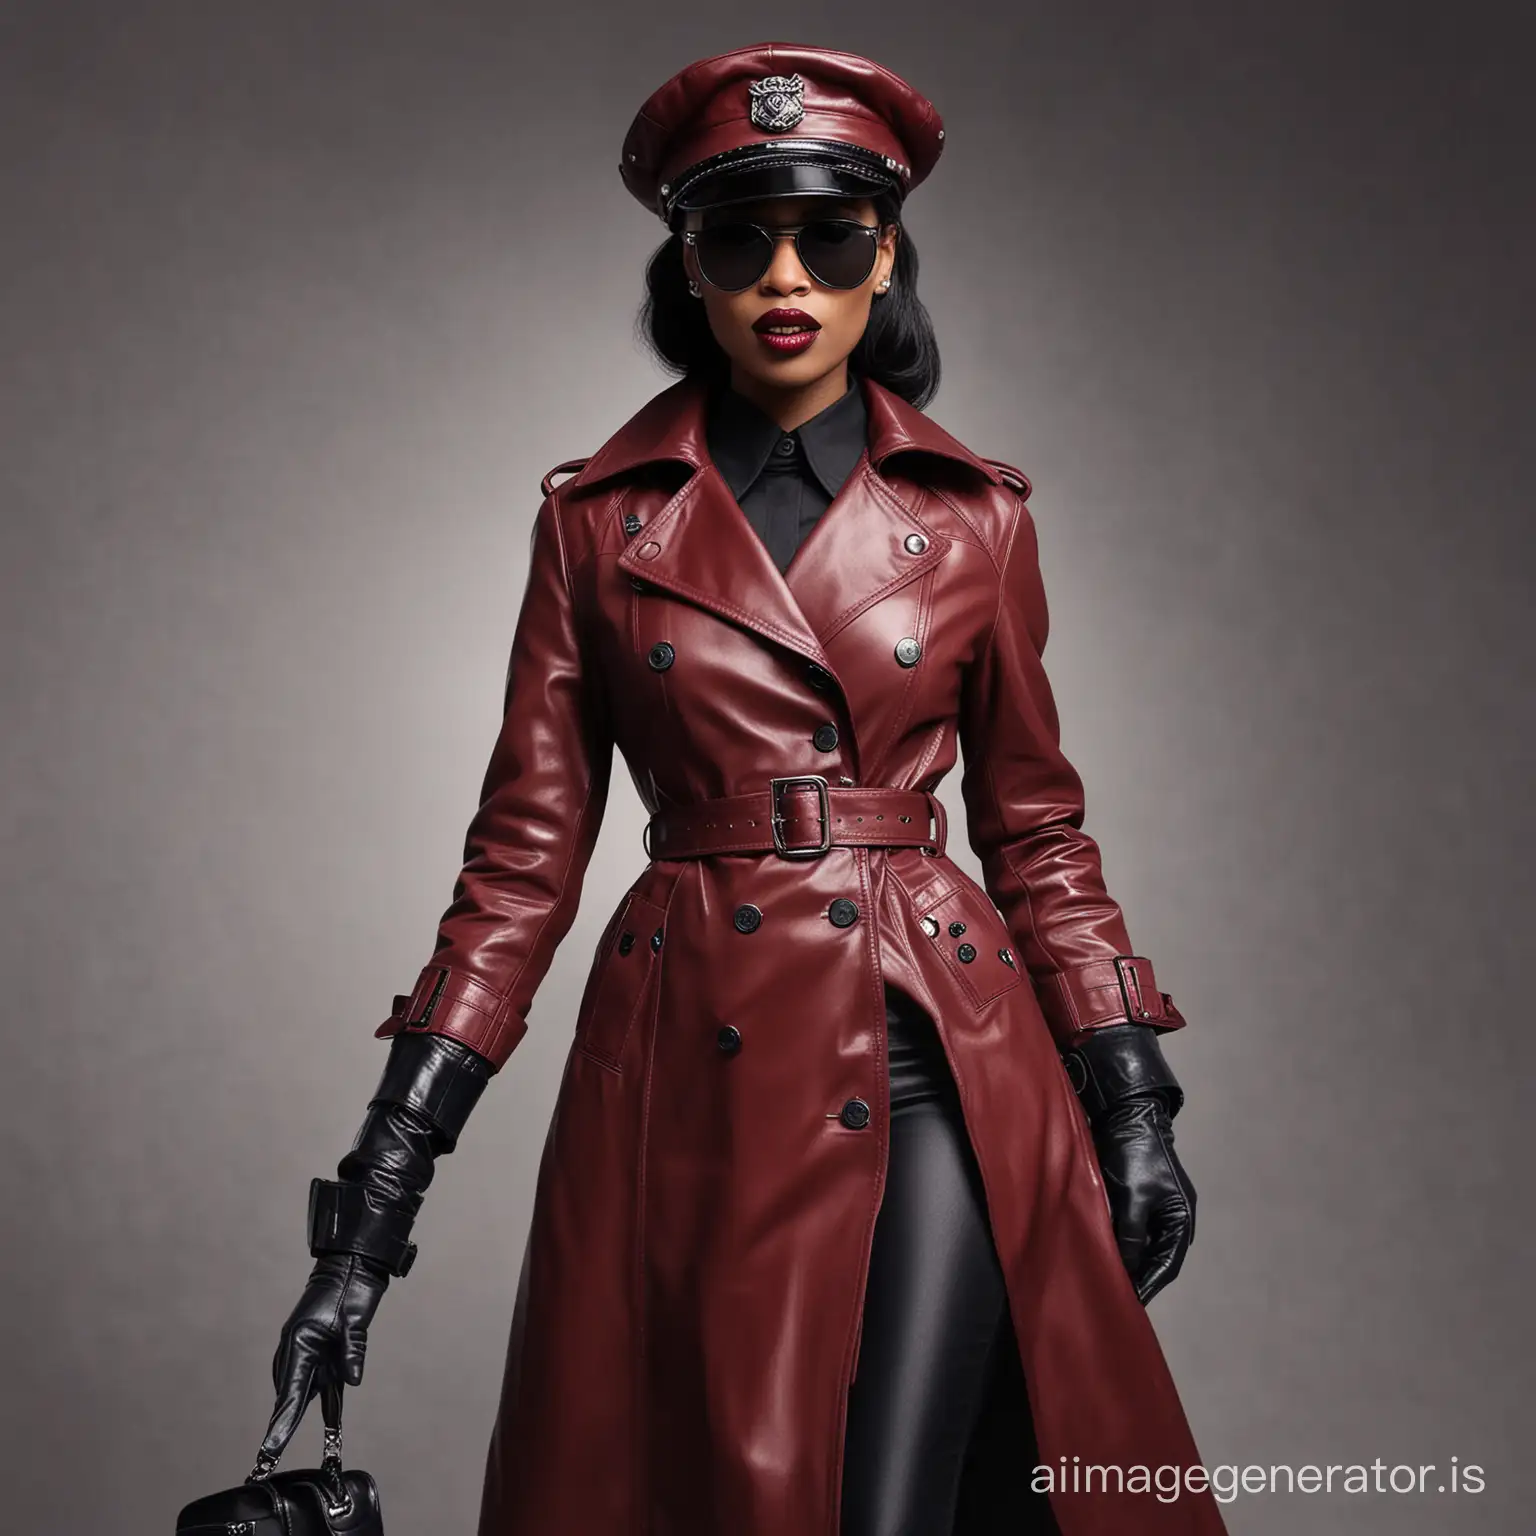 Stylish-Ebony-Woman-in-Dark-Red-Leather-Trench-Coat-and-Accessories